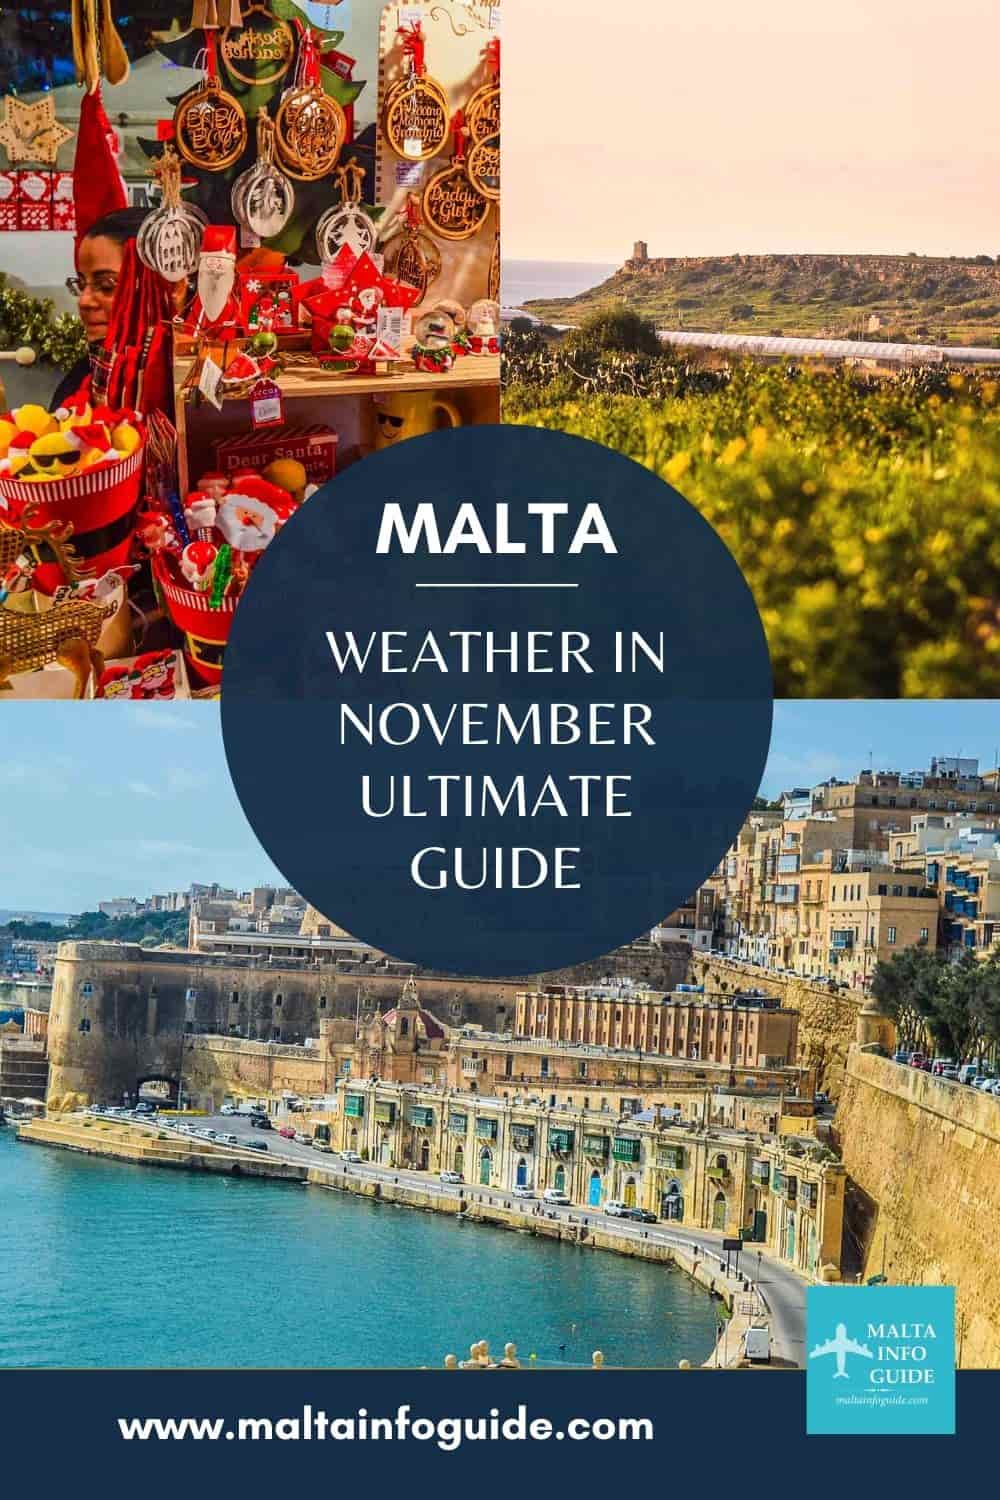 It is cooler by this time, during the day it is still warm depending if cloudy. By now mornings and evenings are fresh. Read more details on the weather in Malta in November page.